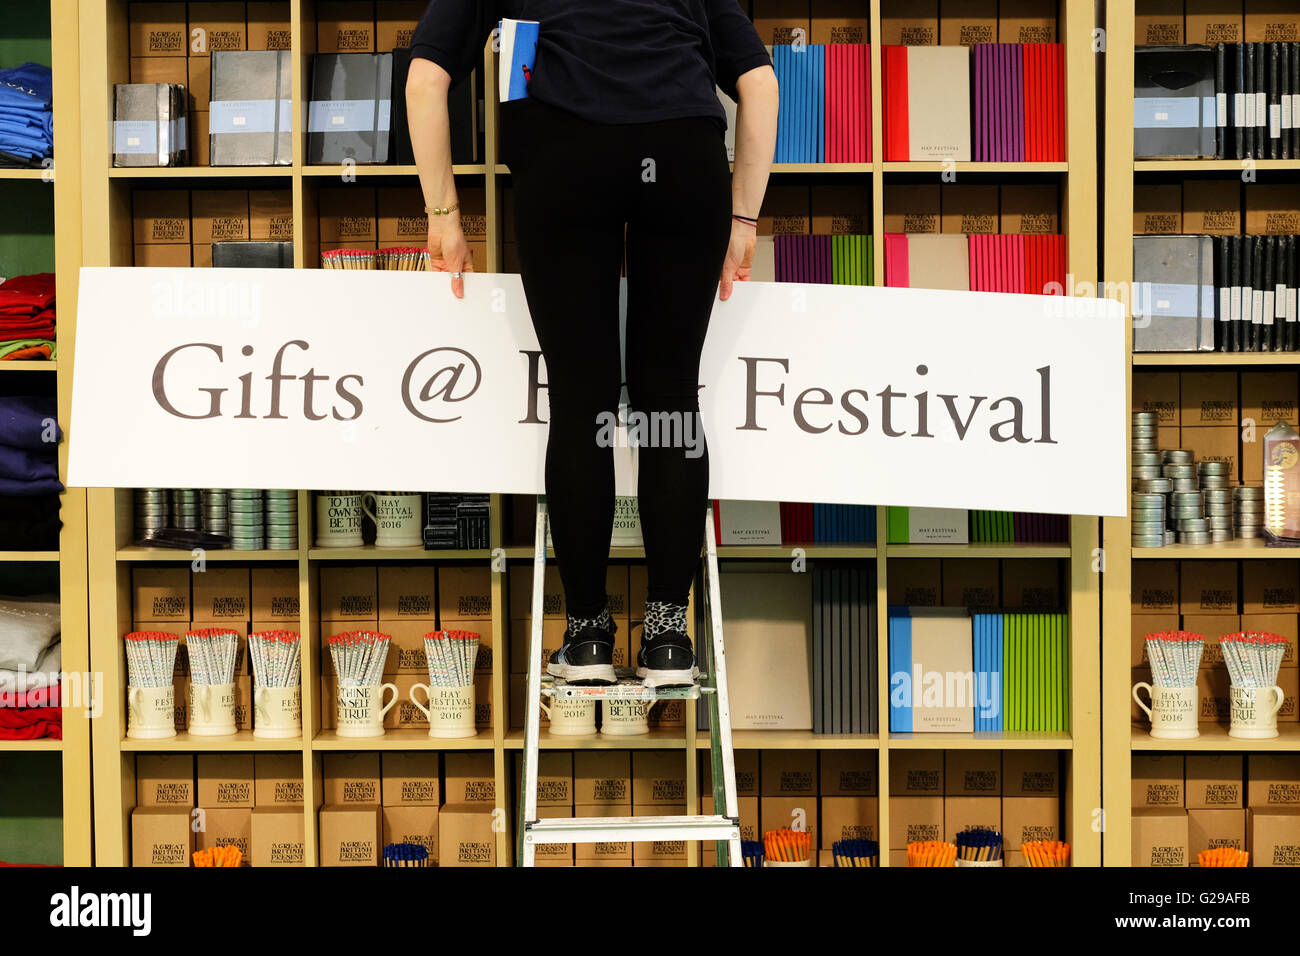 Hay on Wye, Wales, UK. 26th May, 2016.  Opening day for this years literary and arts festival which runs until June 5th. Festival staff make last minute adjustments to the festival bookshop before the public arrive on site. Stock Photo